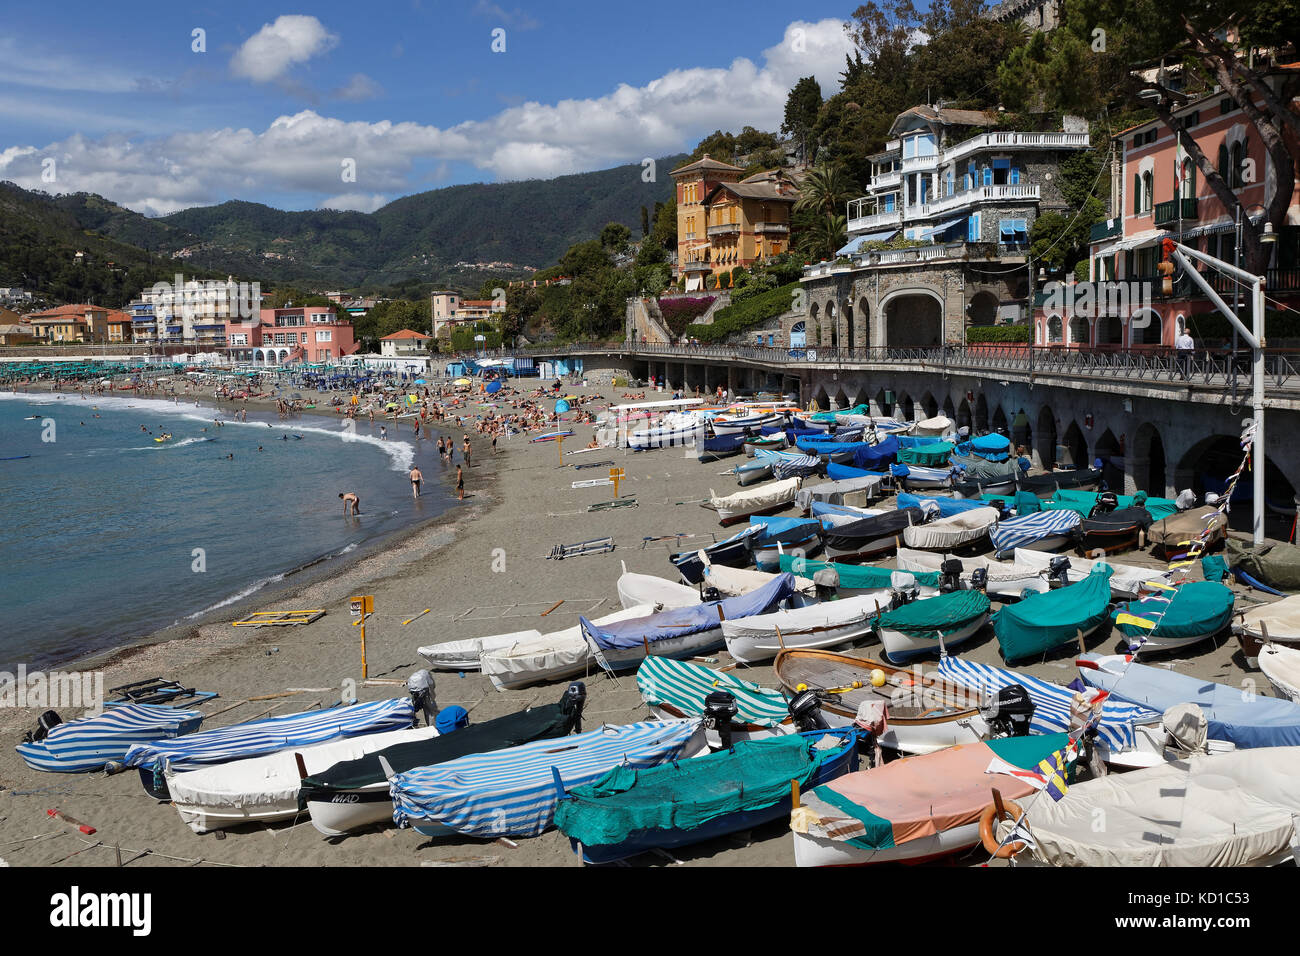 LEVANTO, Italy, June 4, 2017 : The beach of Levanto. Levanto, in the Italian region Liguria, lies on the coast at the end of a valley, thickly wooded  Stock Photo